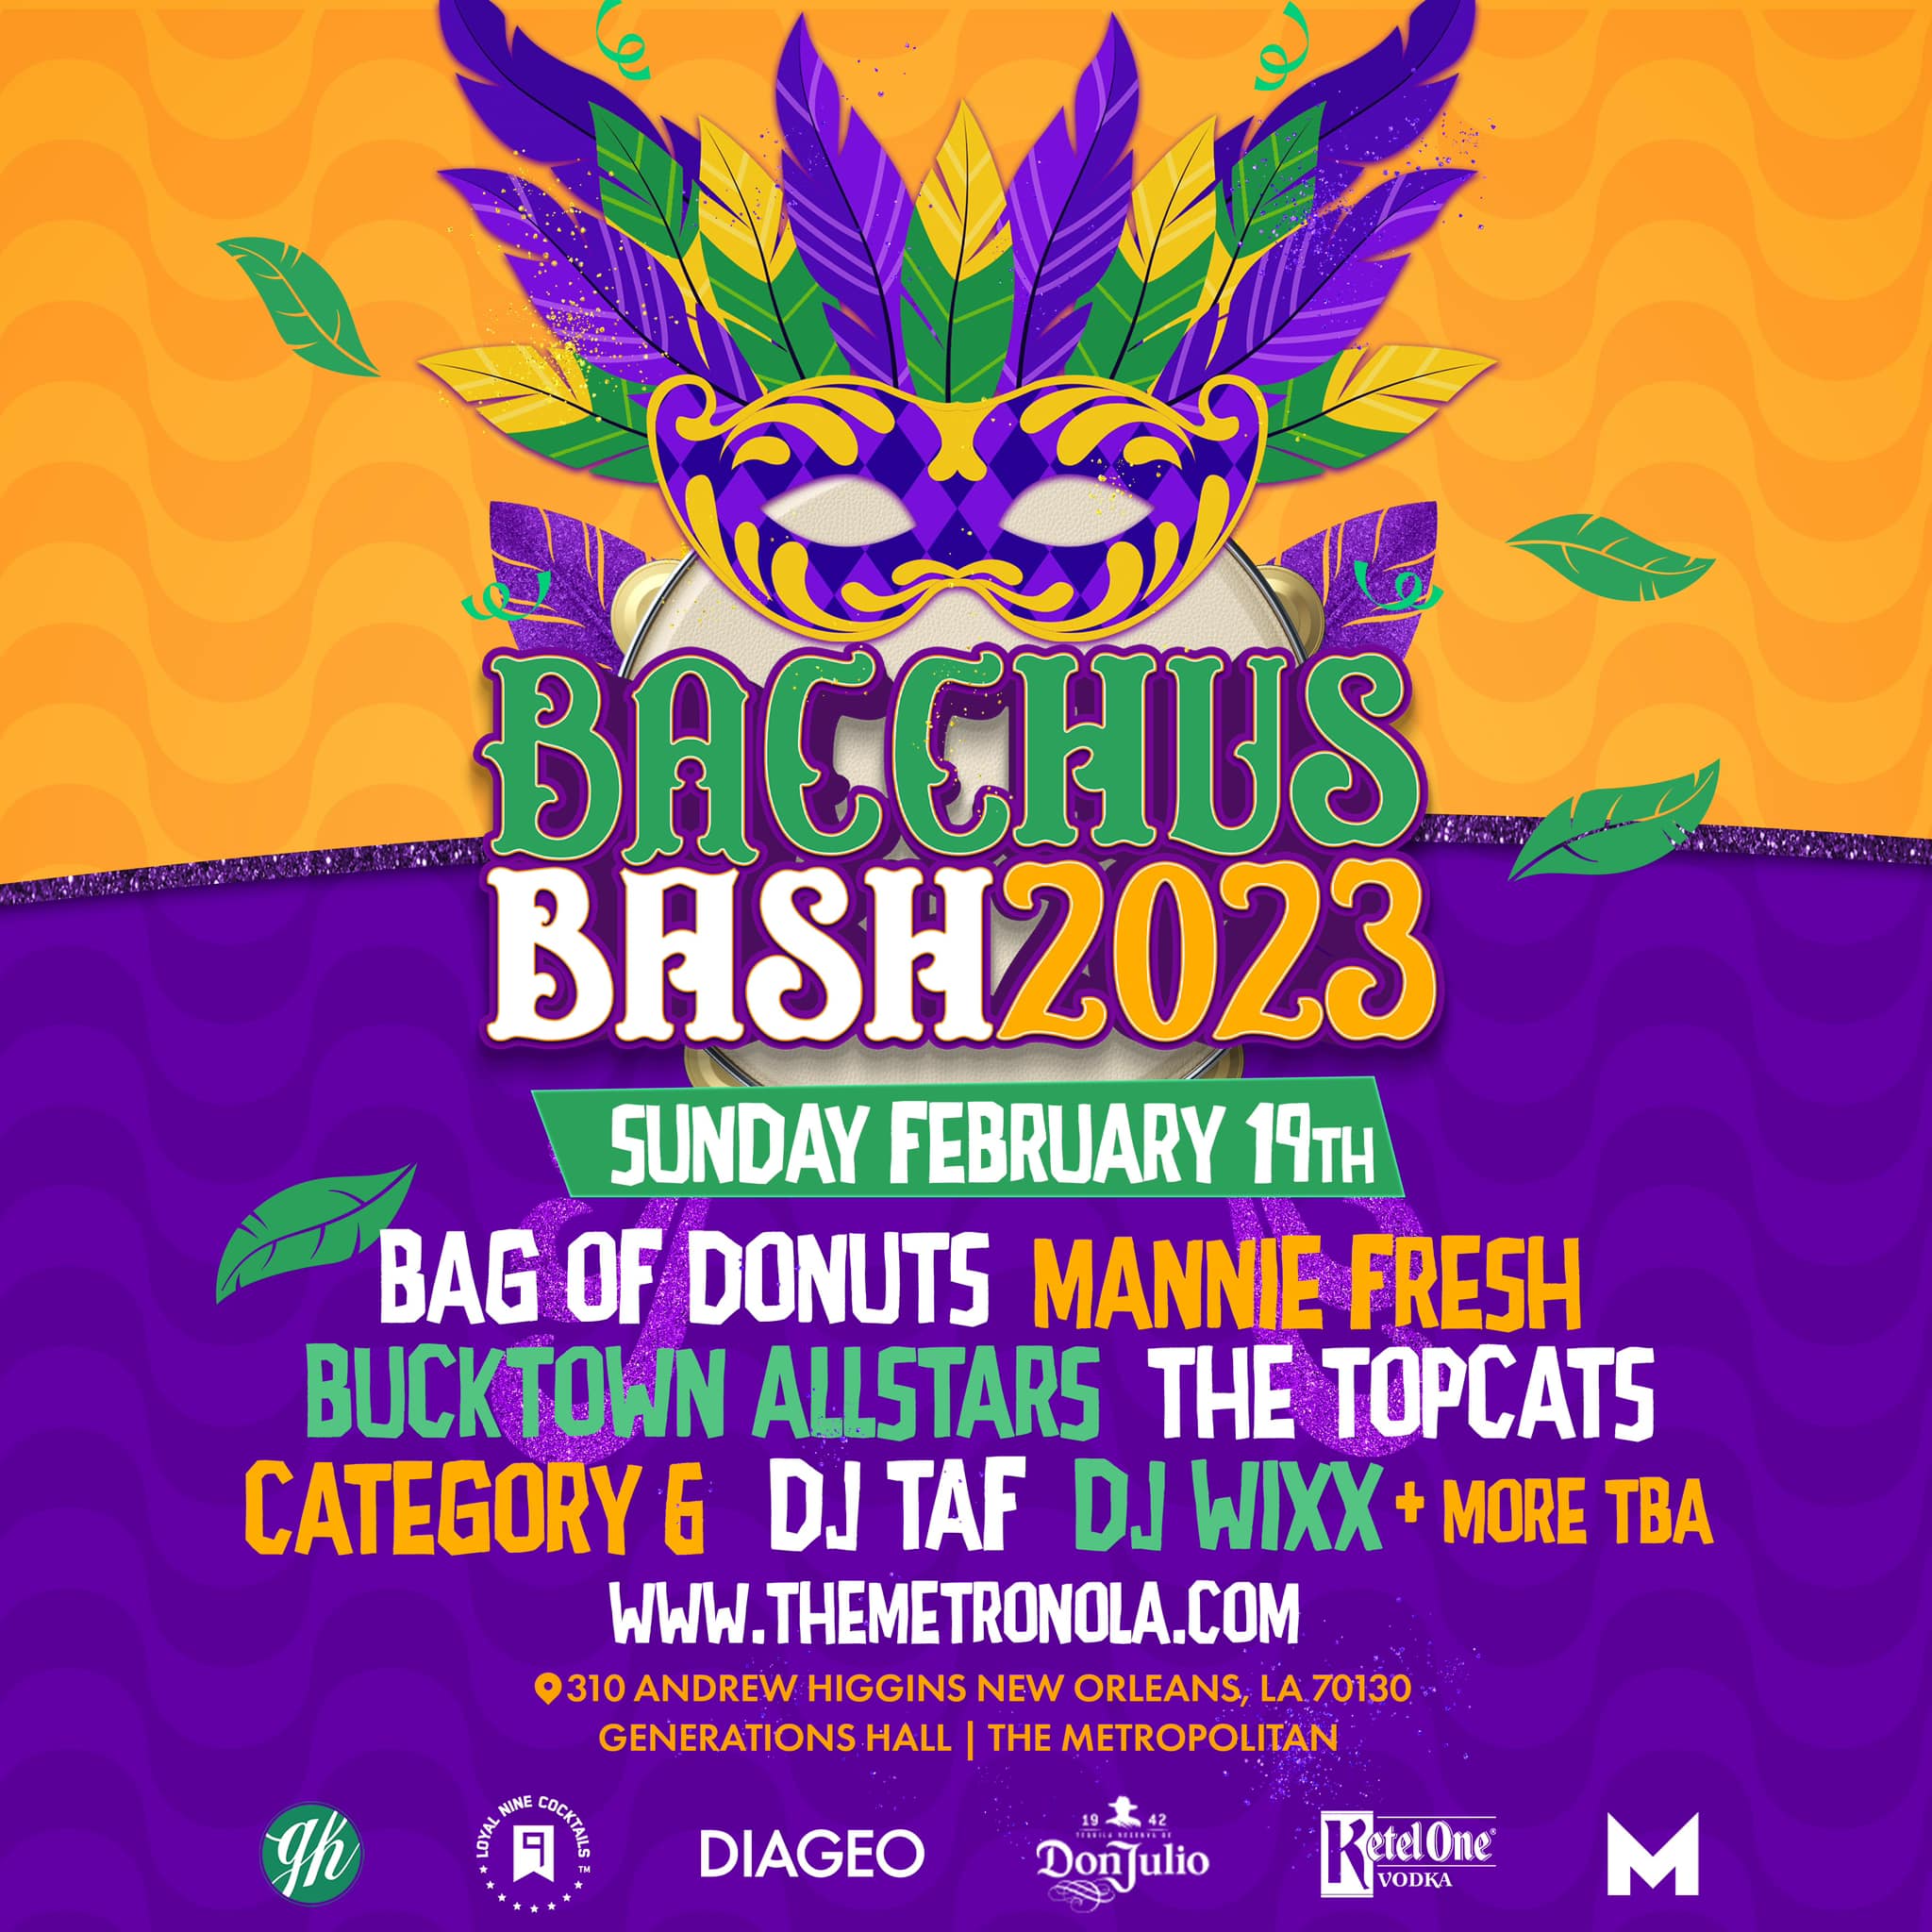 Bacchus Bash New Orleans Local News and Events